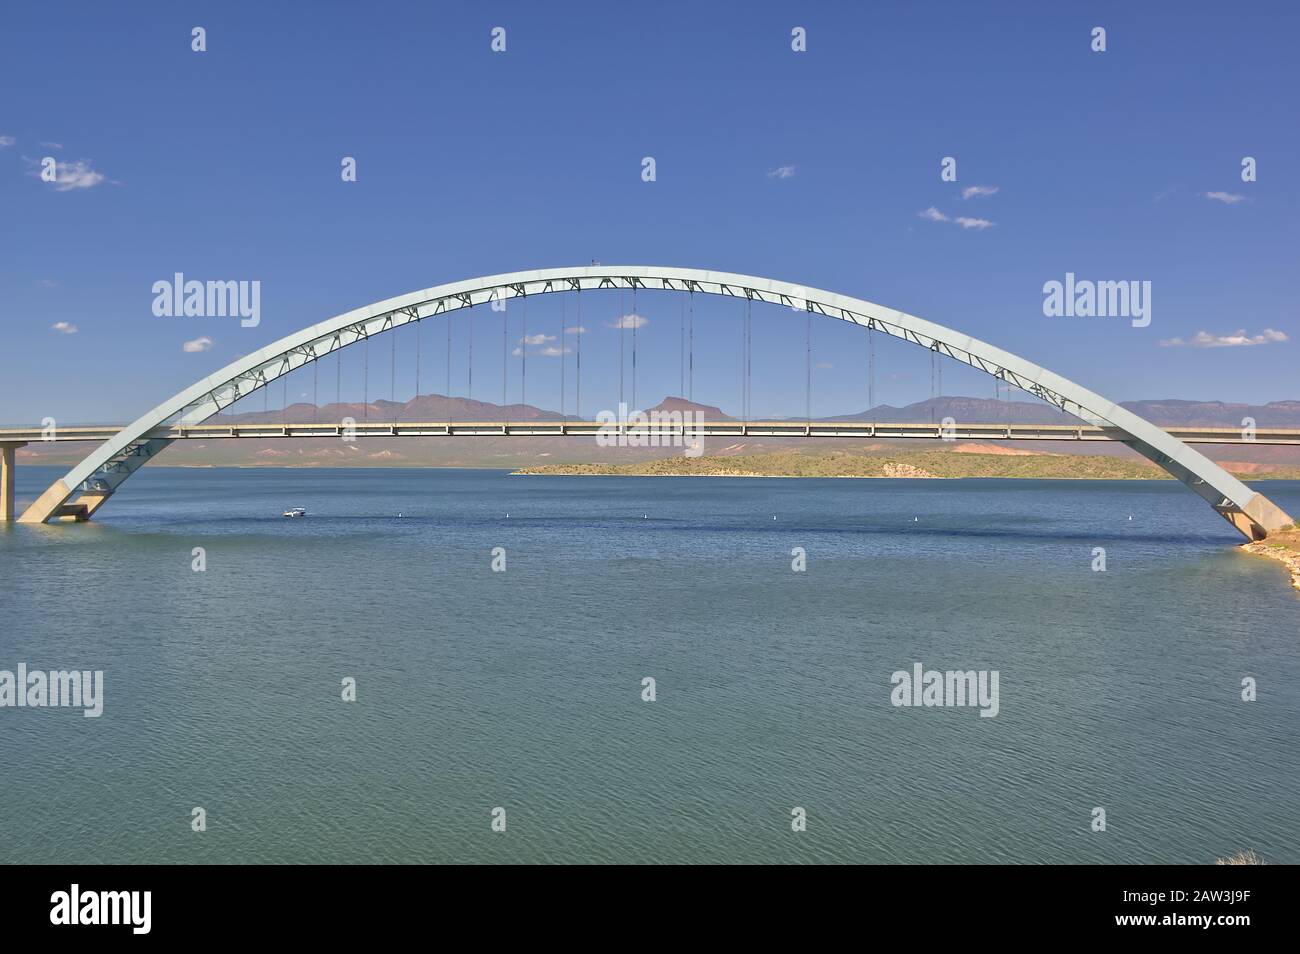 A view of the arch structure of Arizona's Roosevelt lake Bridge. Stock Photo